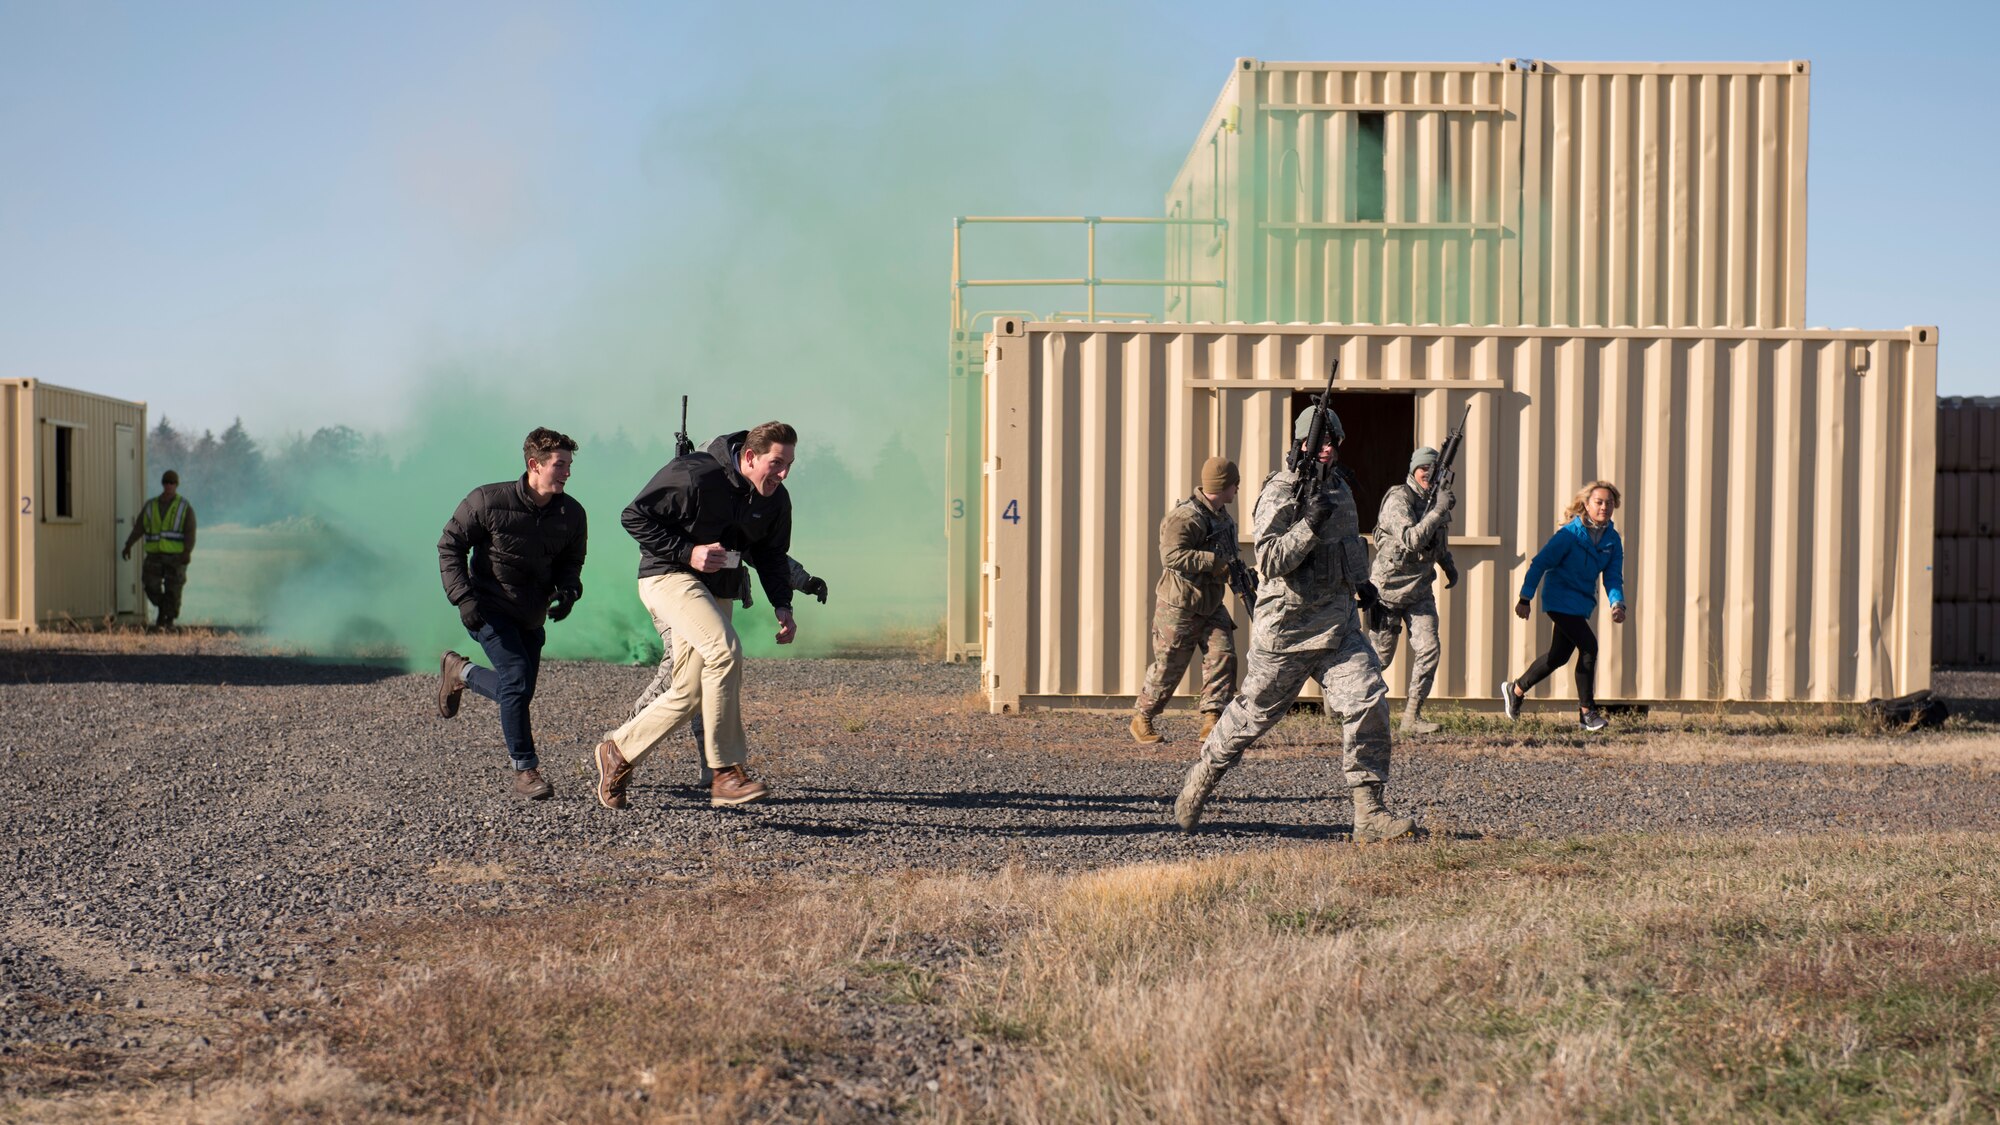 92nd Security Forces Squadron Airmen evacuate local media members to a safe area after a simulated explosion training exercise during a Year of the Defender media day event at Fairchild Air Force Base, Washington, Oct. 29, 2019. Security forces Airmen are charged with training and maintaining combat readiness on weapons and protective gear for all Airmen, ensuring everyone is deployment ready. (U.S. Air Force photo by Senior Airman Ryan Lackey)